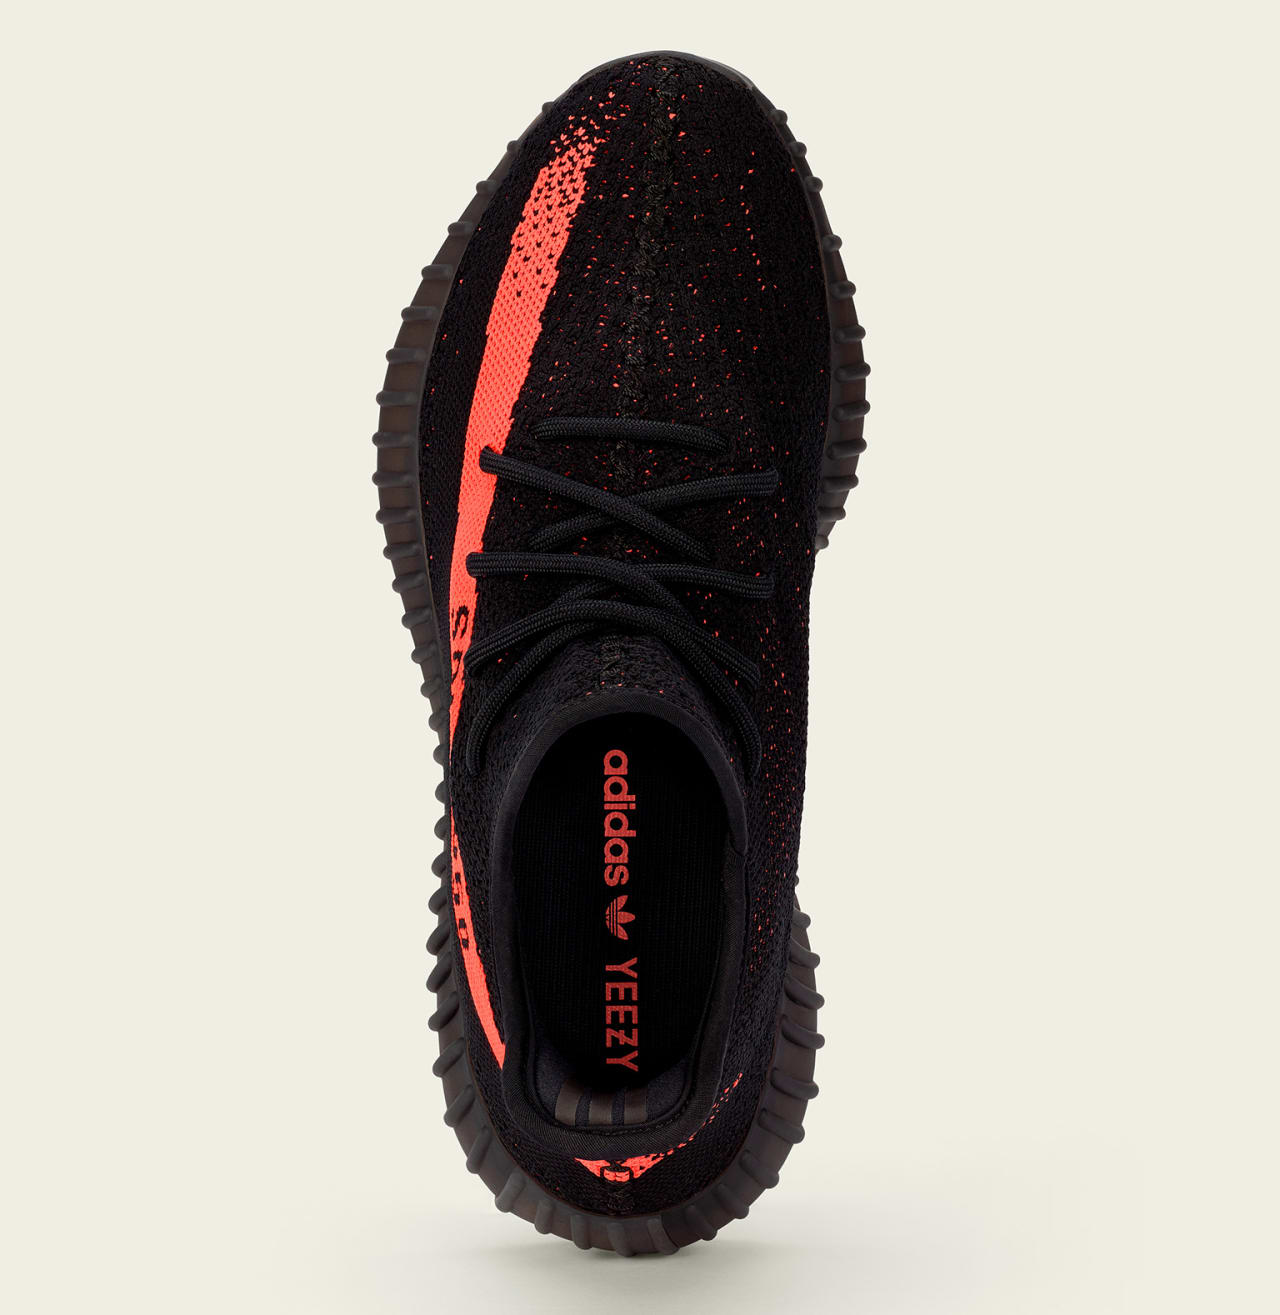 Adidas Yeezy 350 Boost V2 Store List | Sole Collector